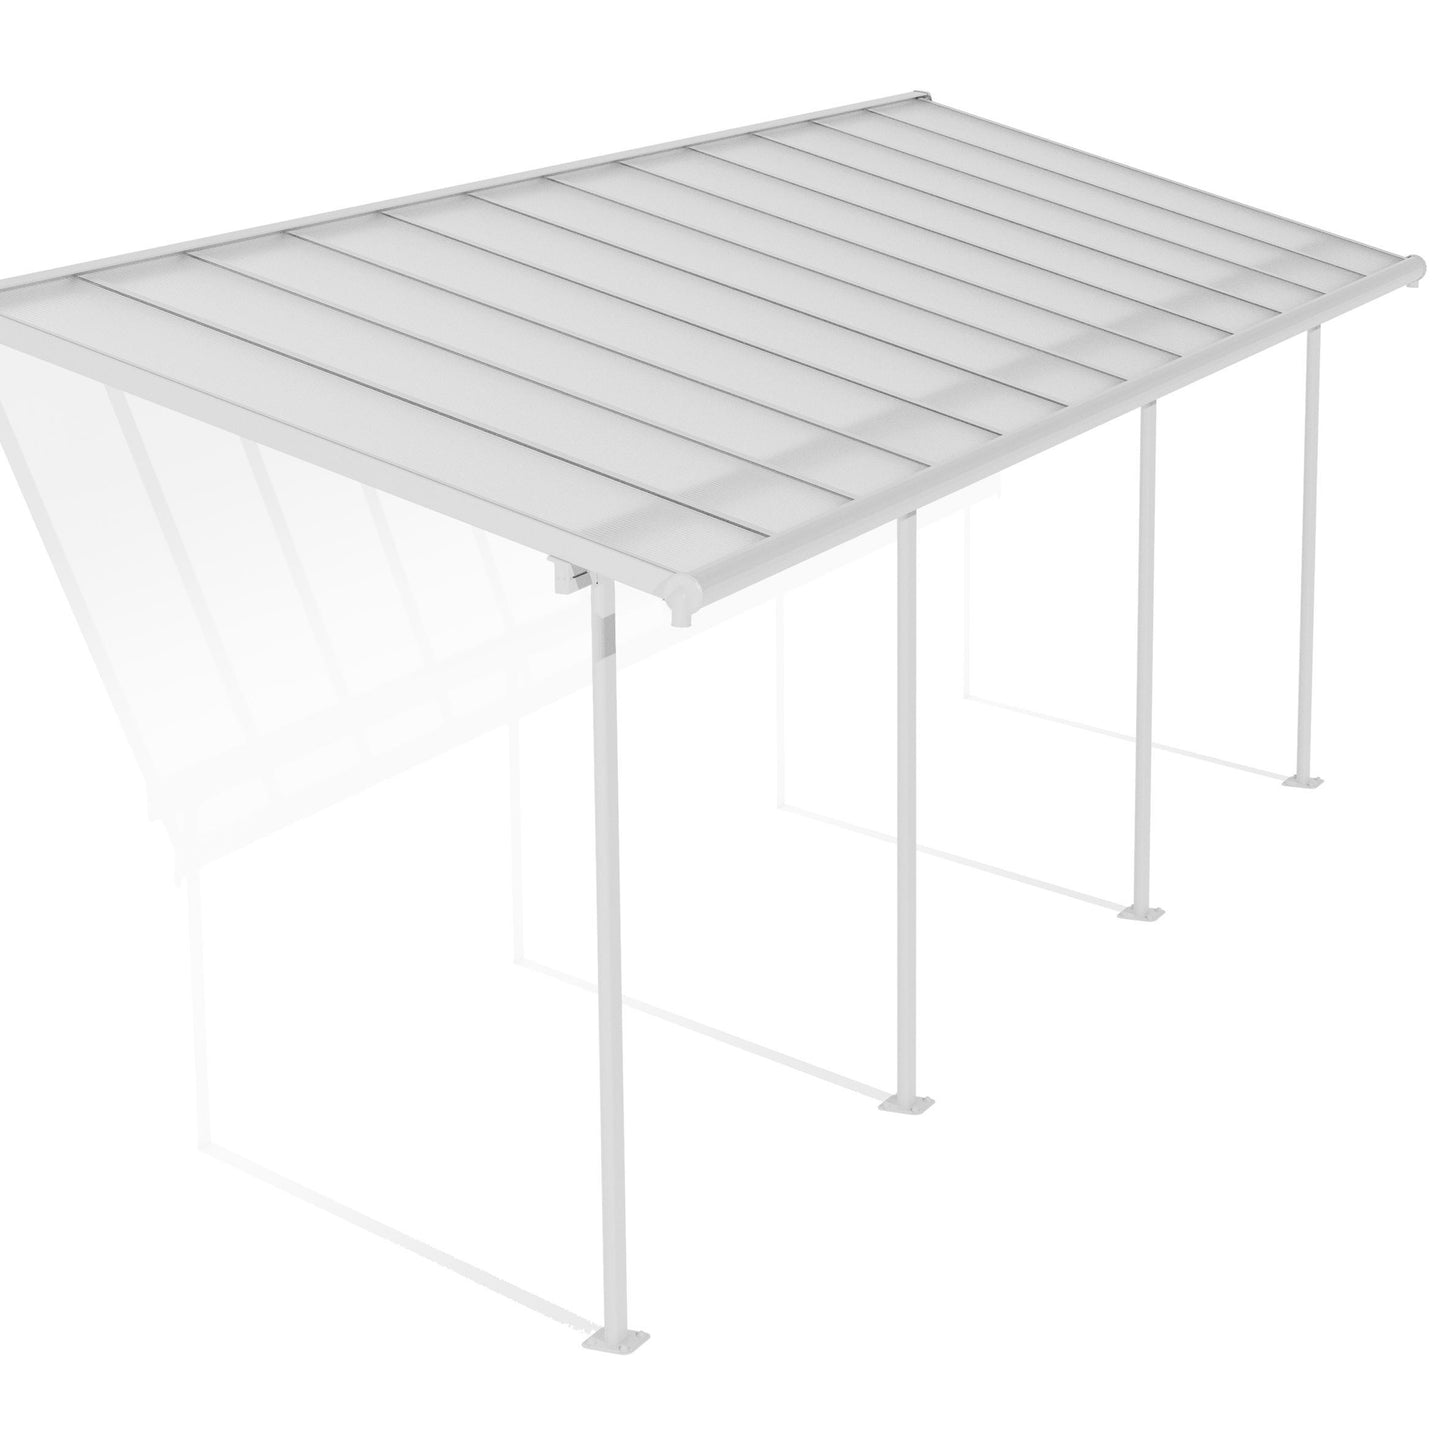 Canopia by Palram 2.3 x 6.9 Sierra Patio Cover - White